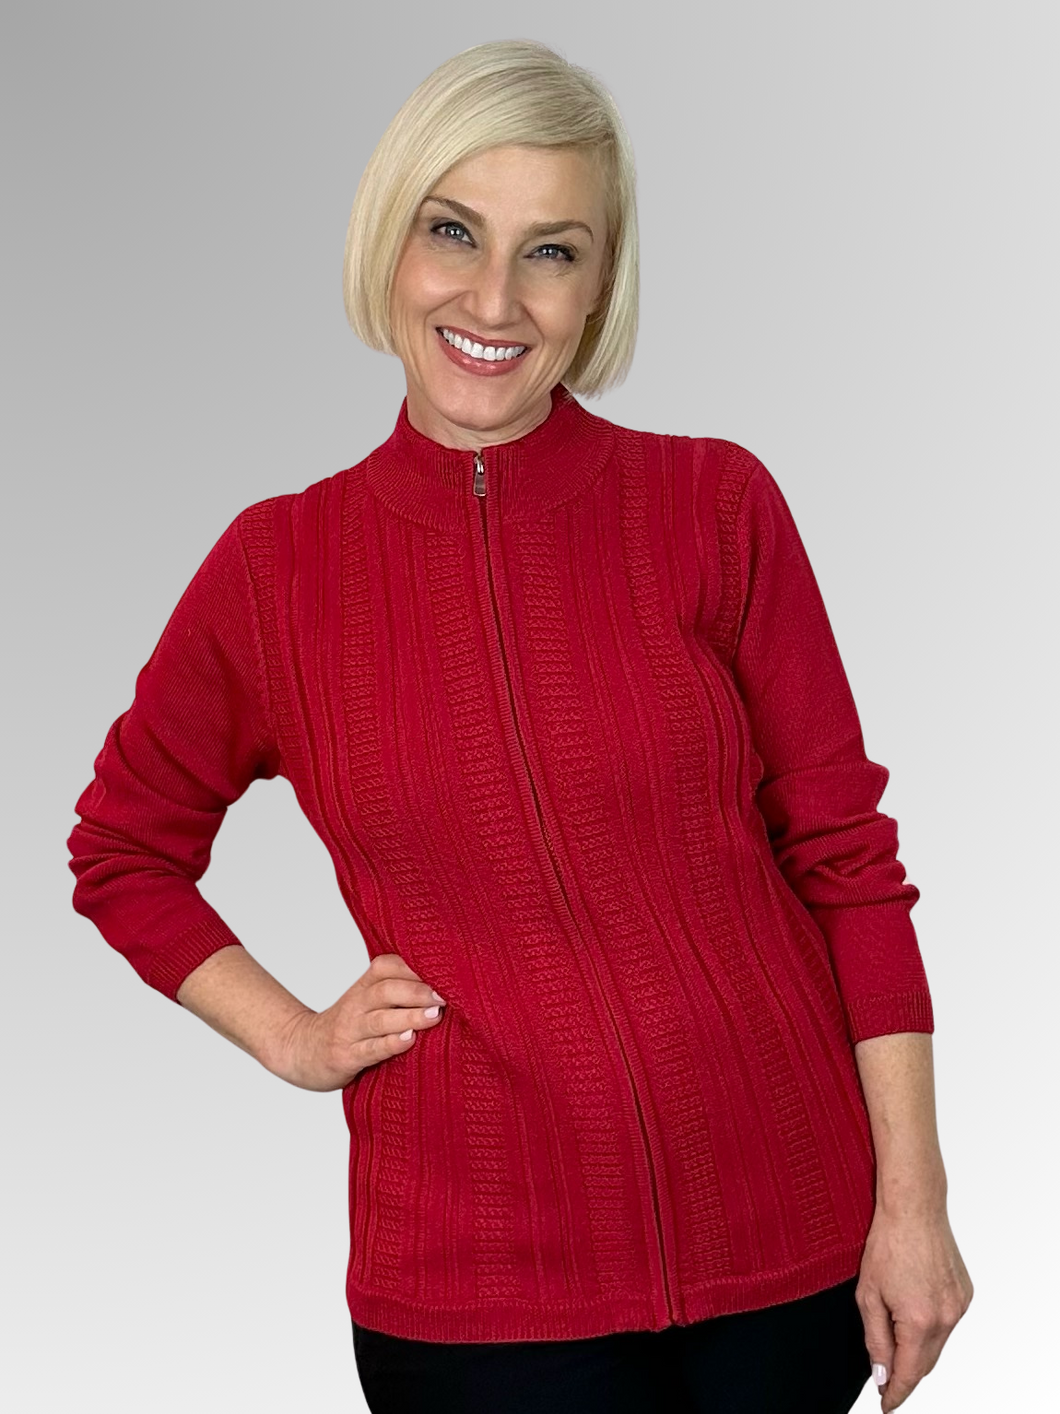 Slade Knitwear is a well-known Australian brand with a 70-year history of creating high-quality knitwear for women. This Cherry Zip Front Cardigan, made from 100% Wool, is a sporty and versatile addition to any outfit. Slade is the go-to for all your winter knitwear needs!